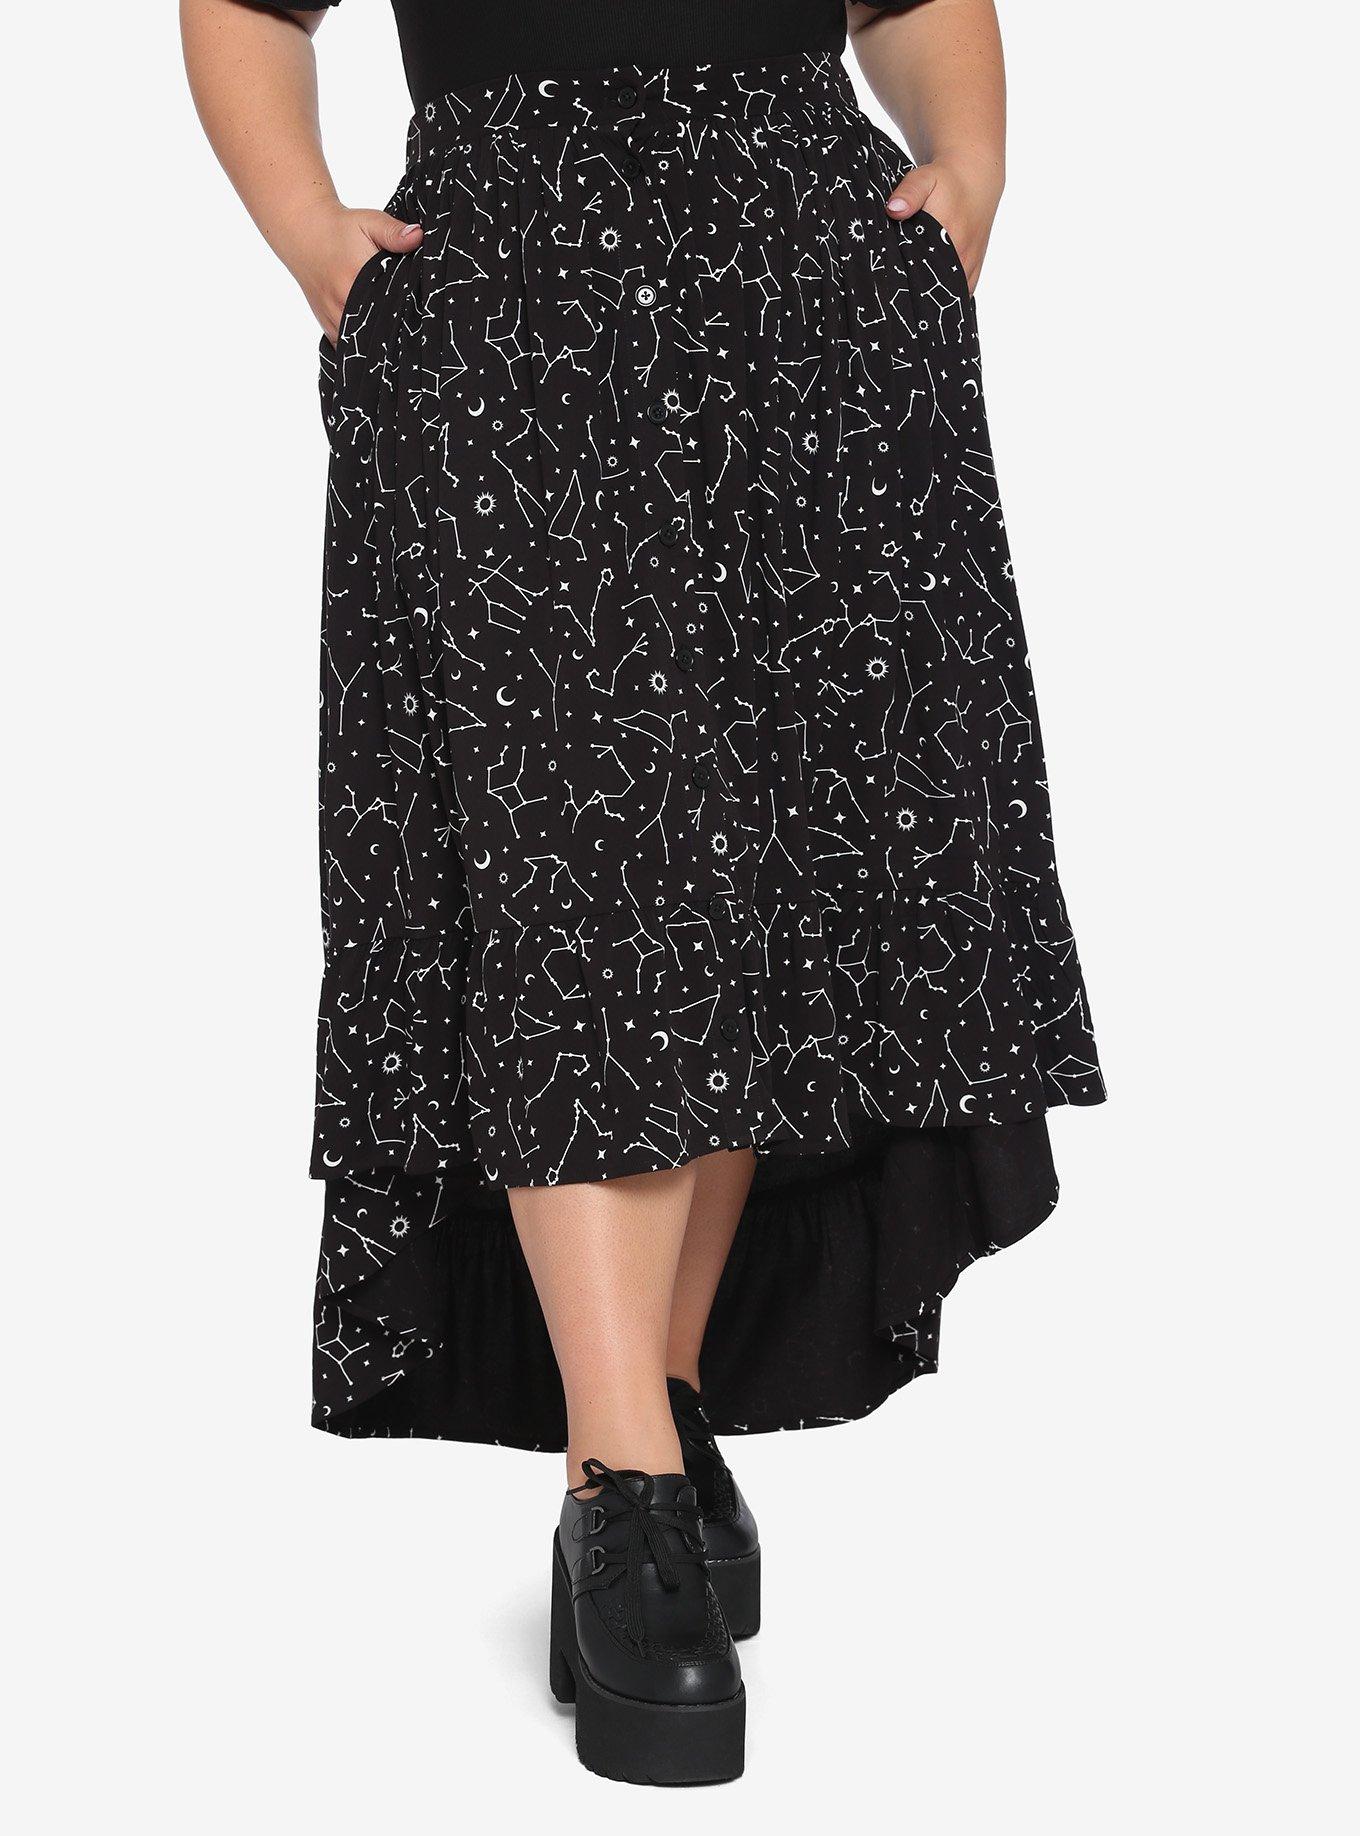 Celestial Constellations Hi-Low Maxi Skirt Plus Size | Hot Topic